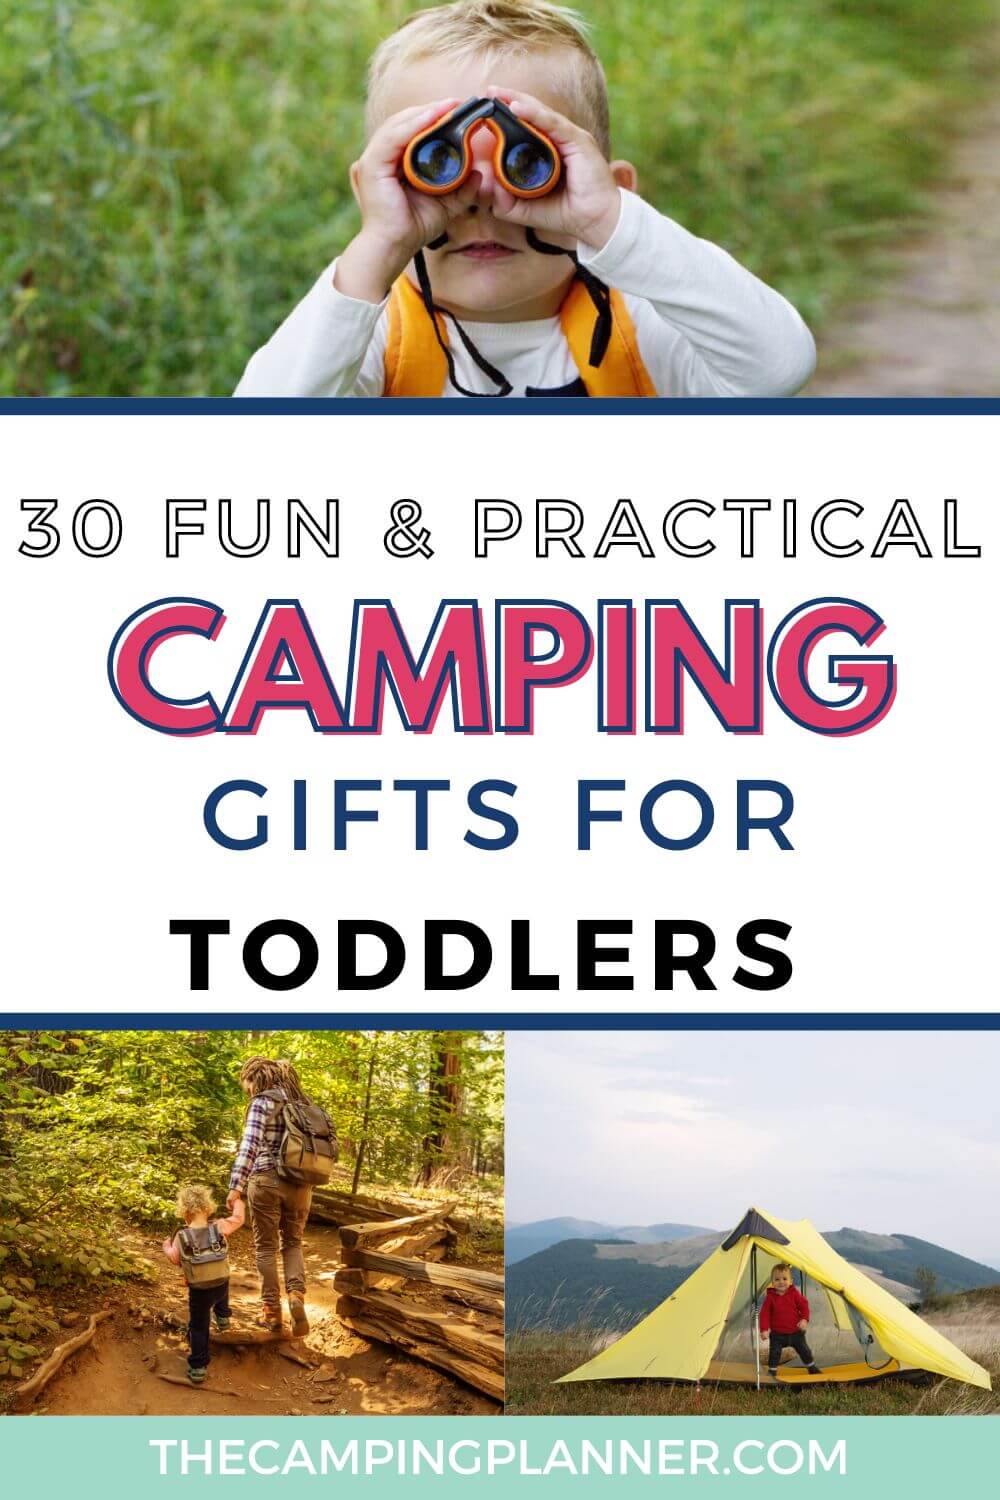 fun and practical camping gifts for toddlers.